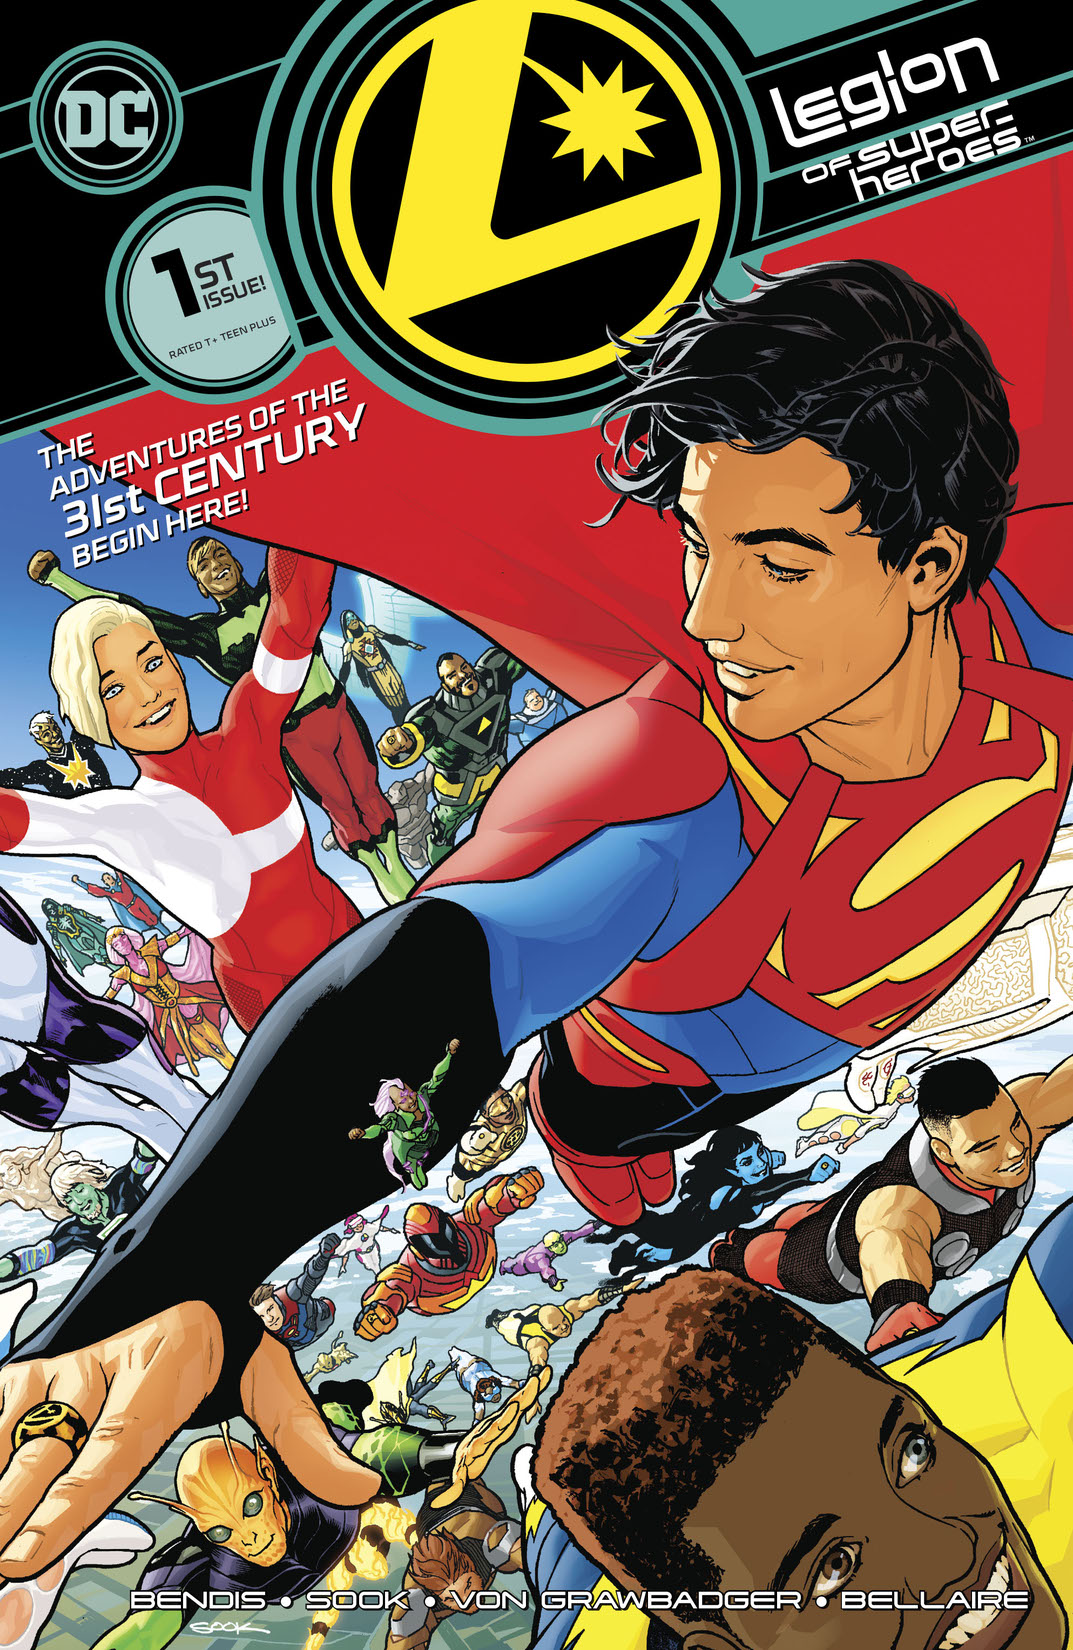 Legion of Super-Heroes (2019-) #1 preview images